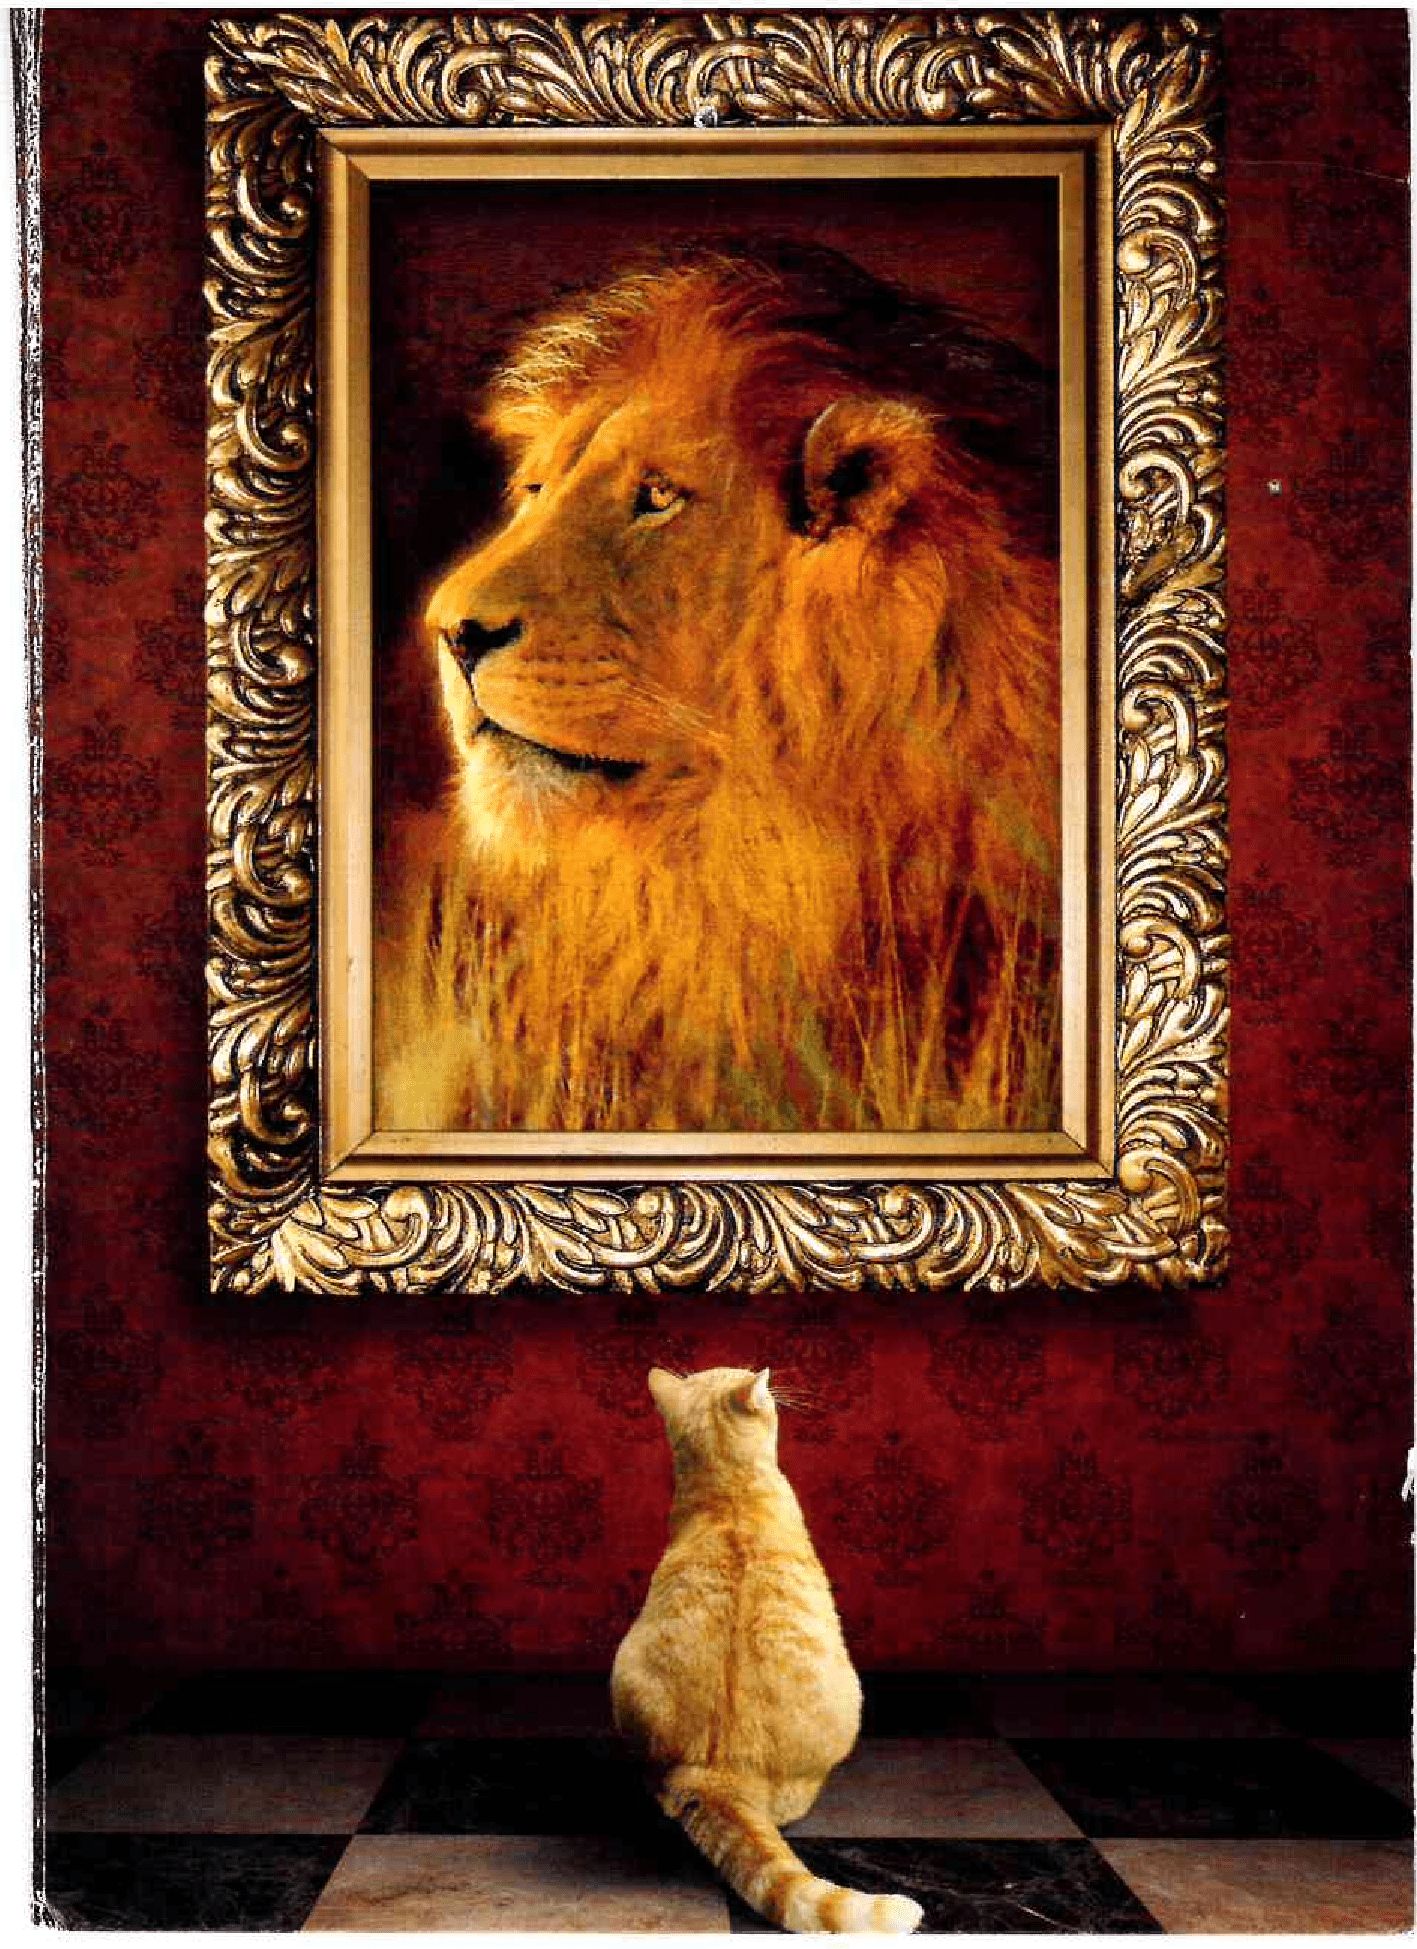 Cat Looking at the Lion Photo frame on Wall